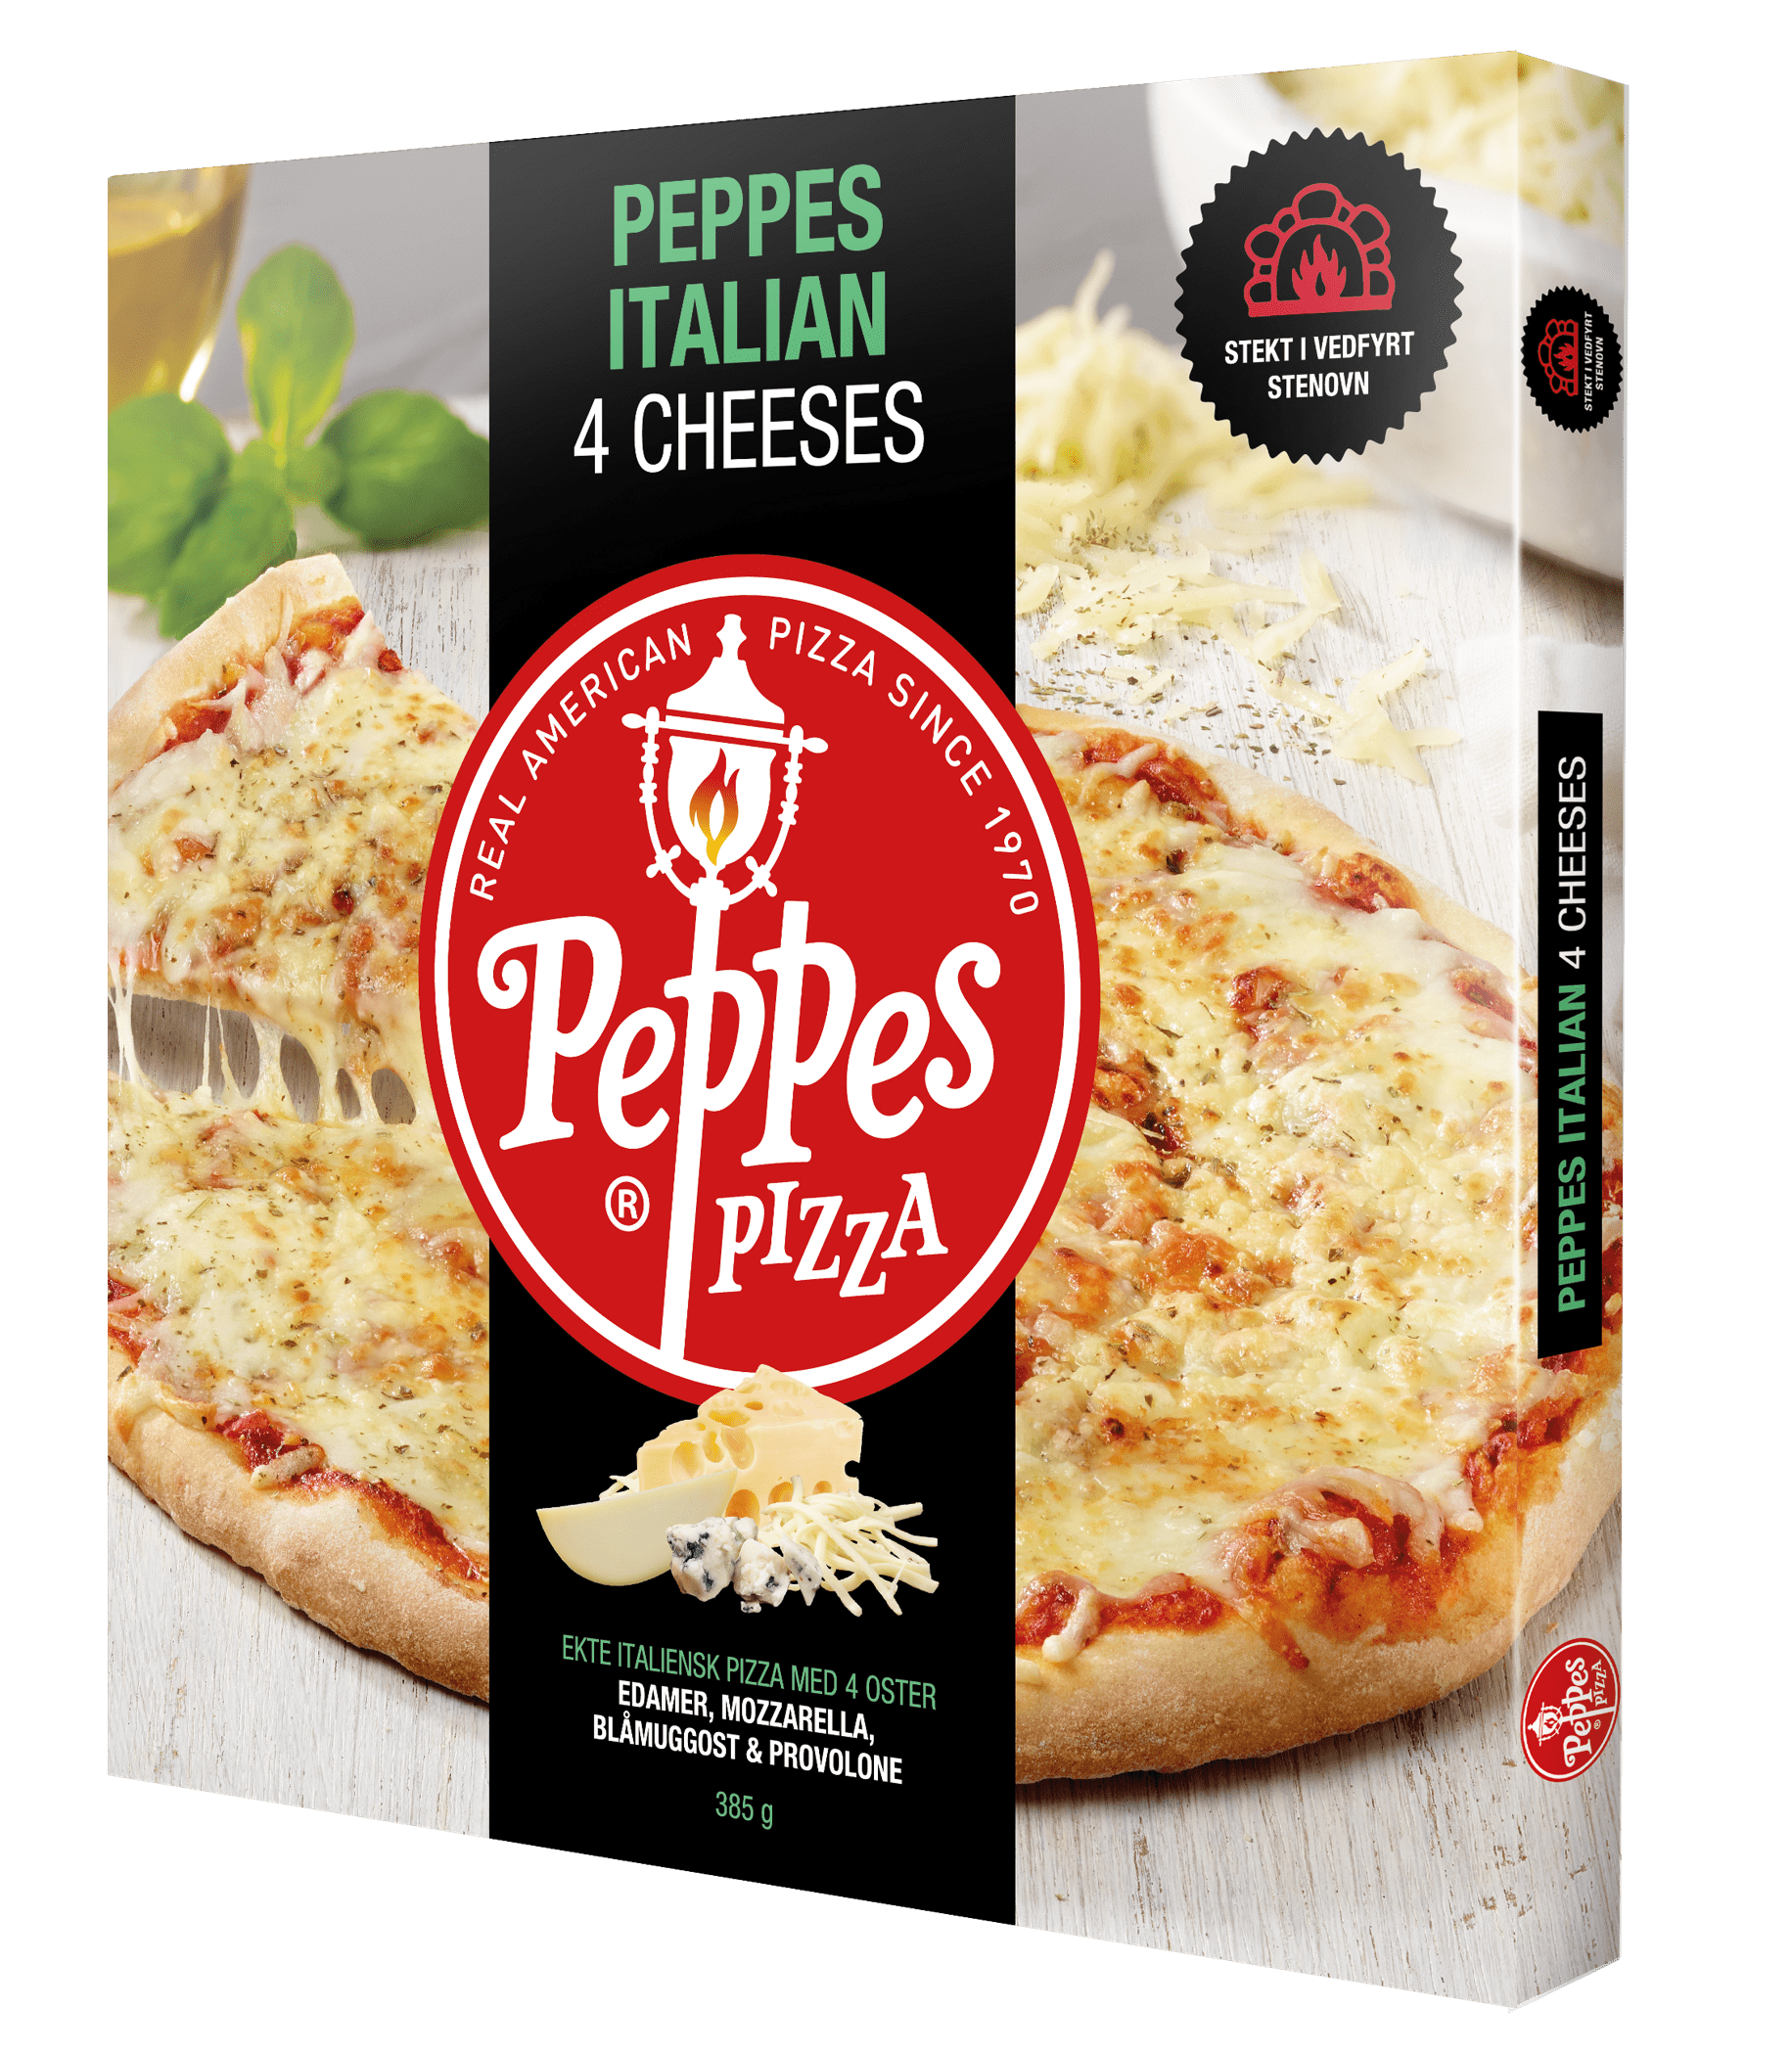 Peppes_Italian_4cheeses_3D_mockup.png